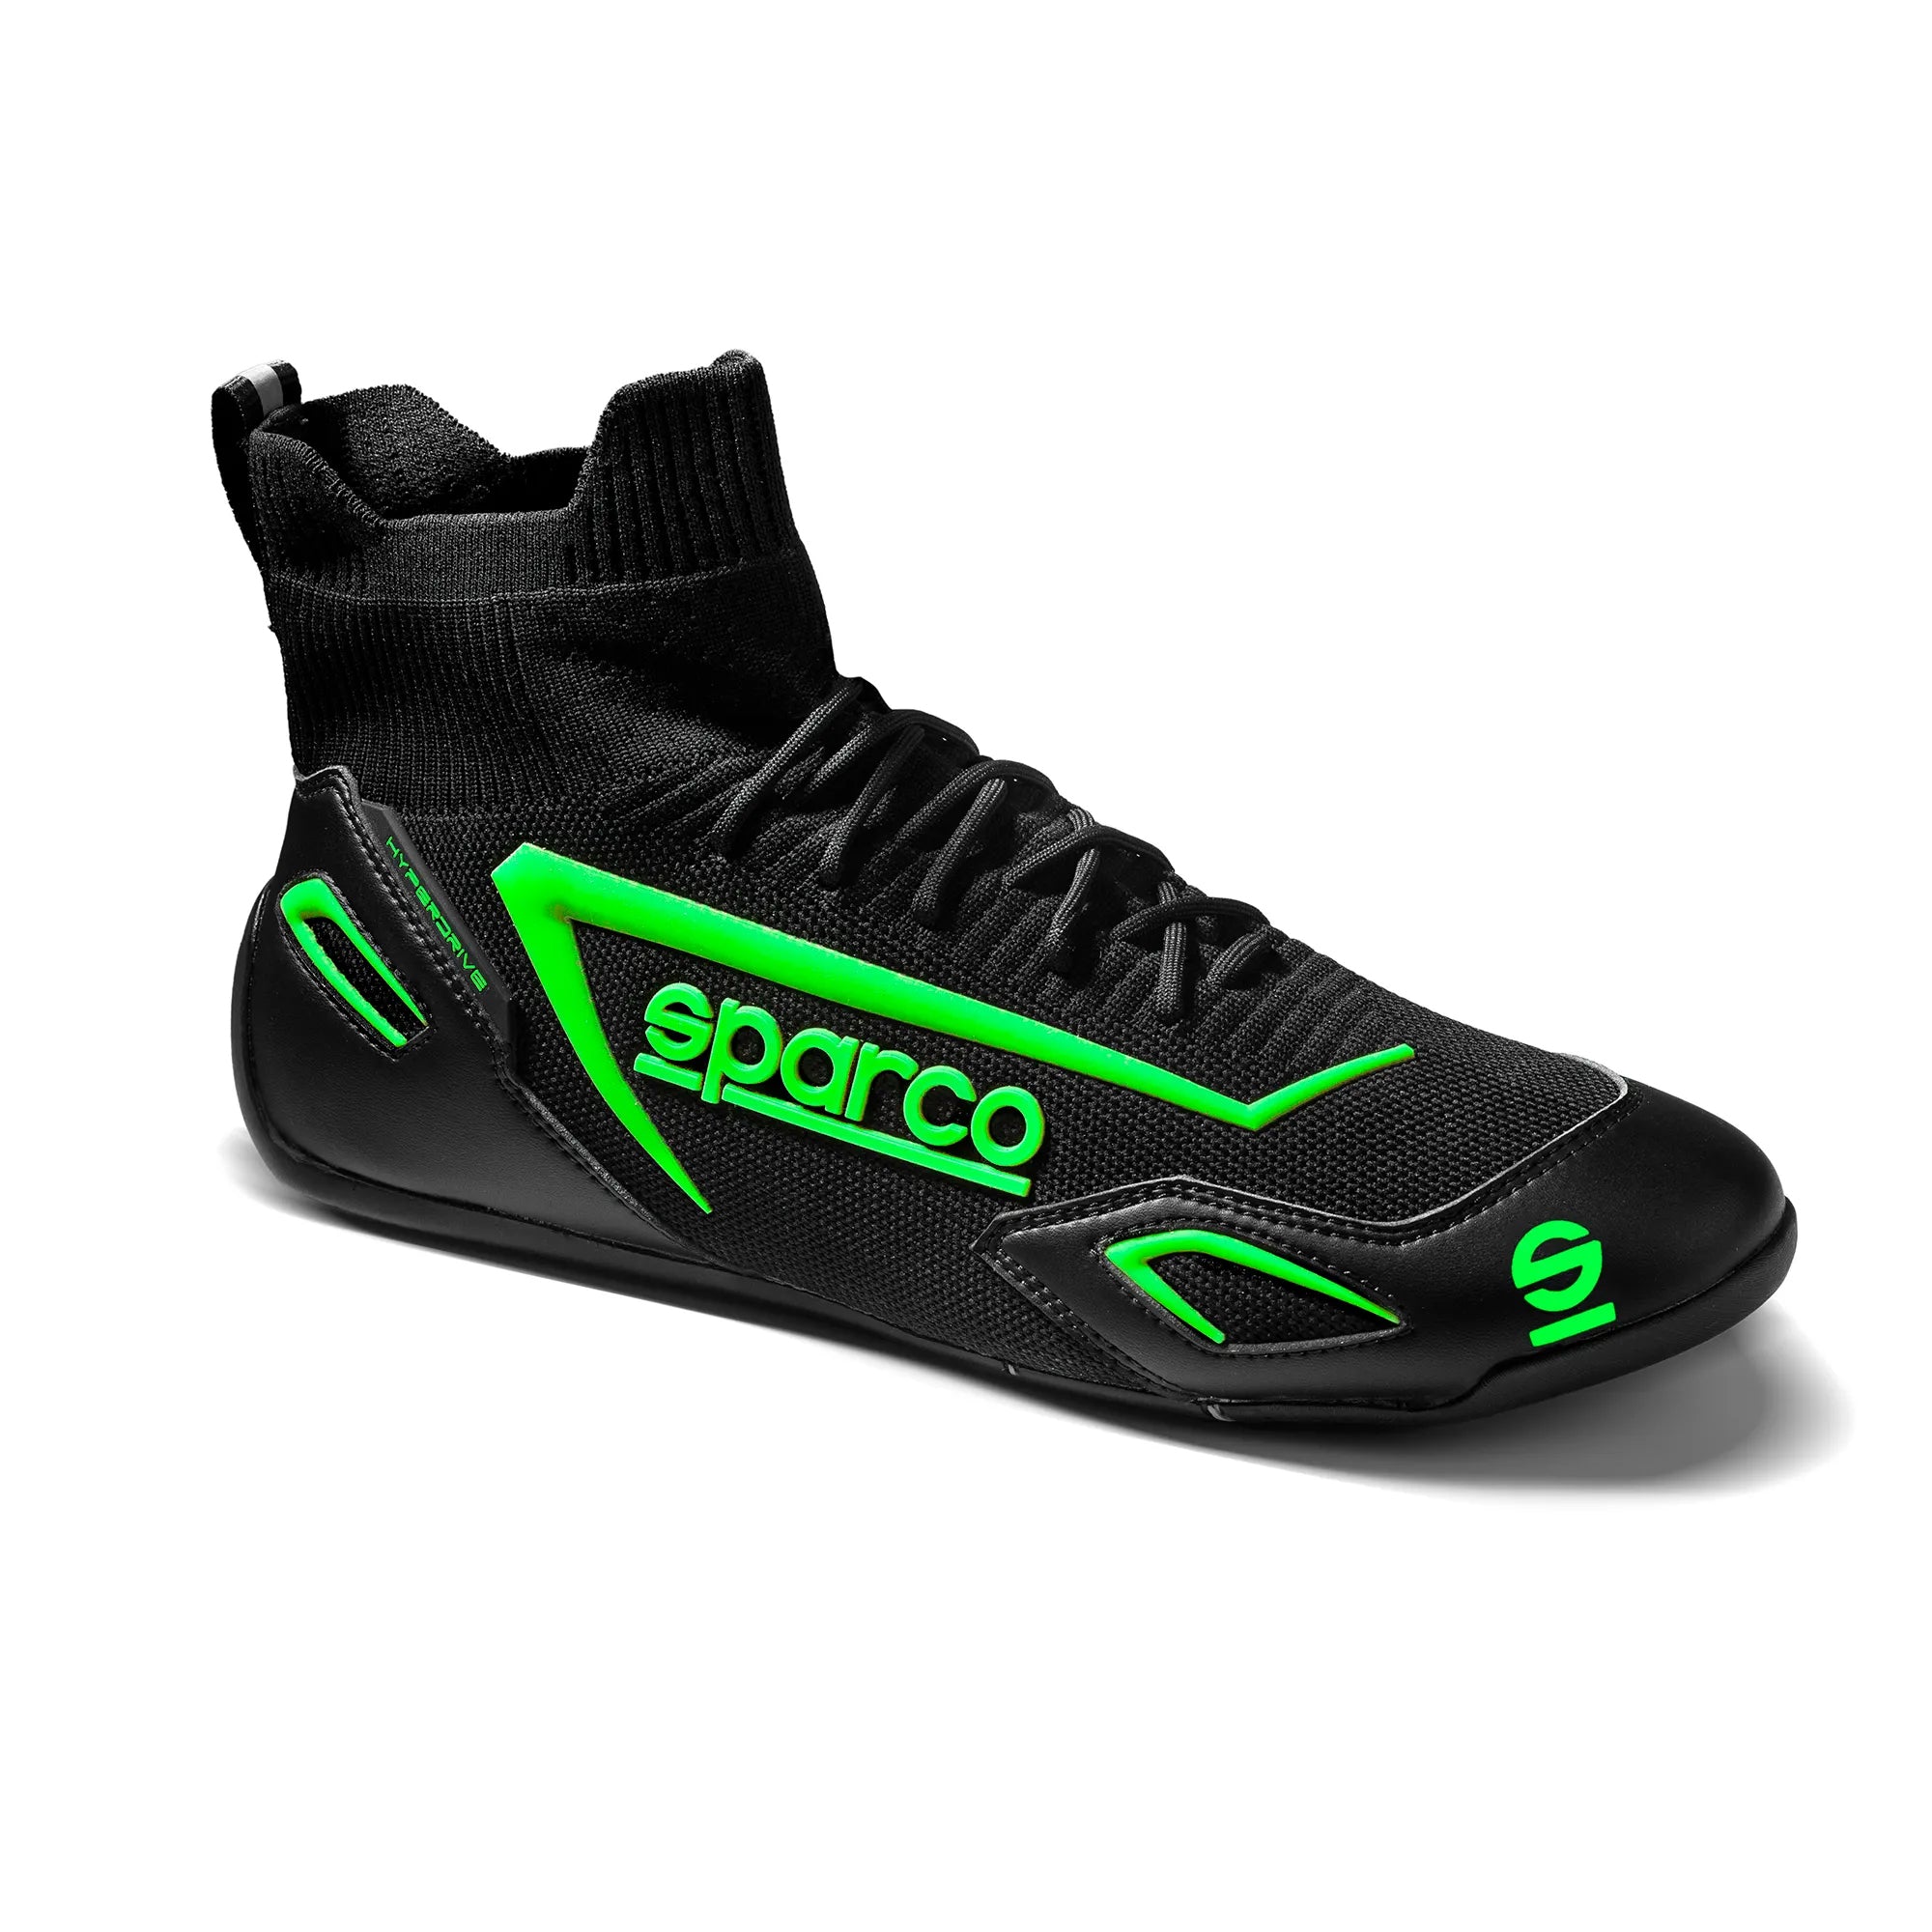 SPARCO 00129344NRVF Gaming sim racing shoes HYPERDRIVE, black/green, size 44 Photo-1 